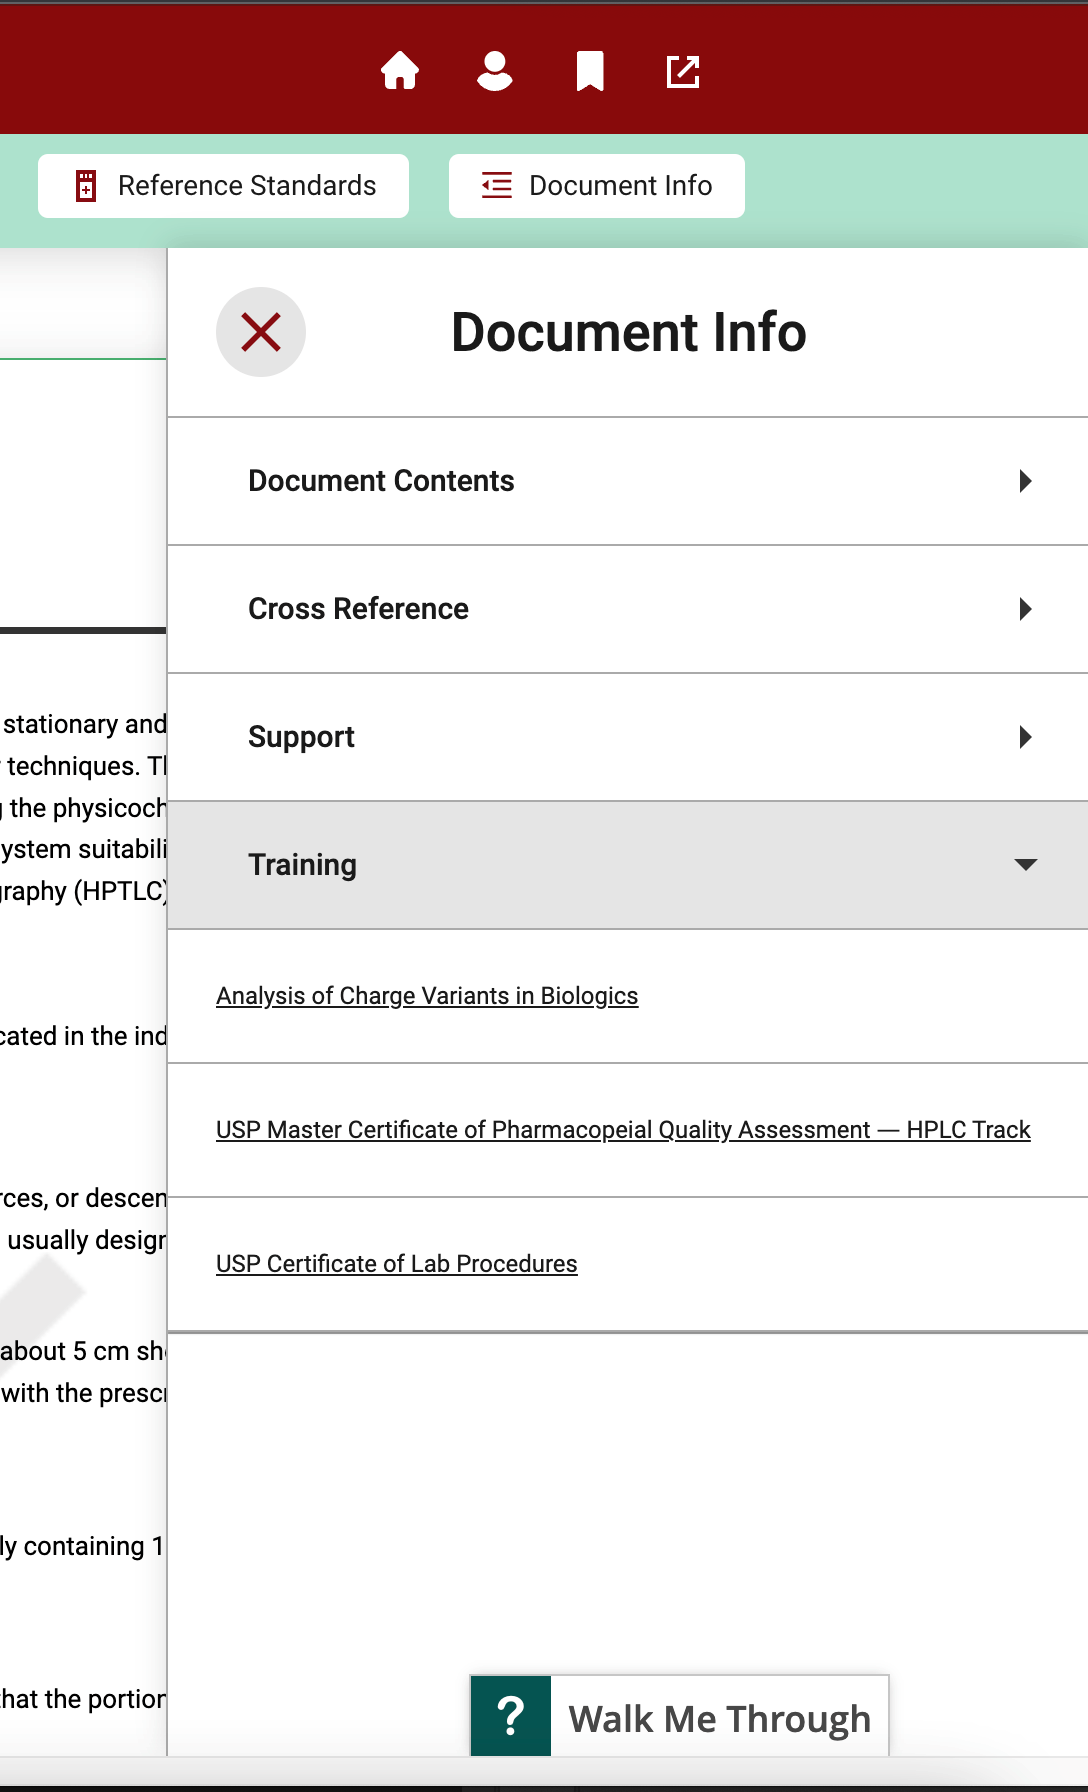 Image shows the tabs provided by the Document Info Panel